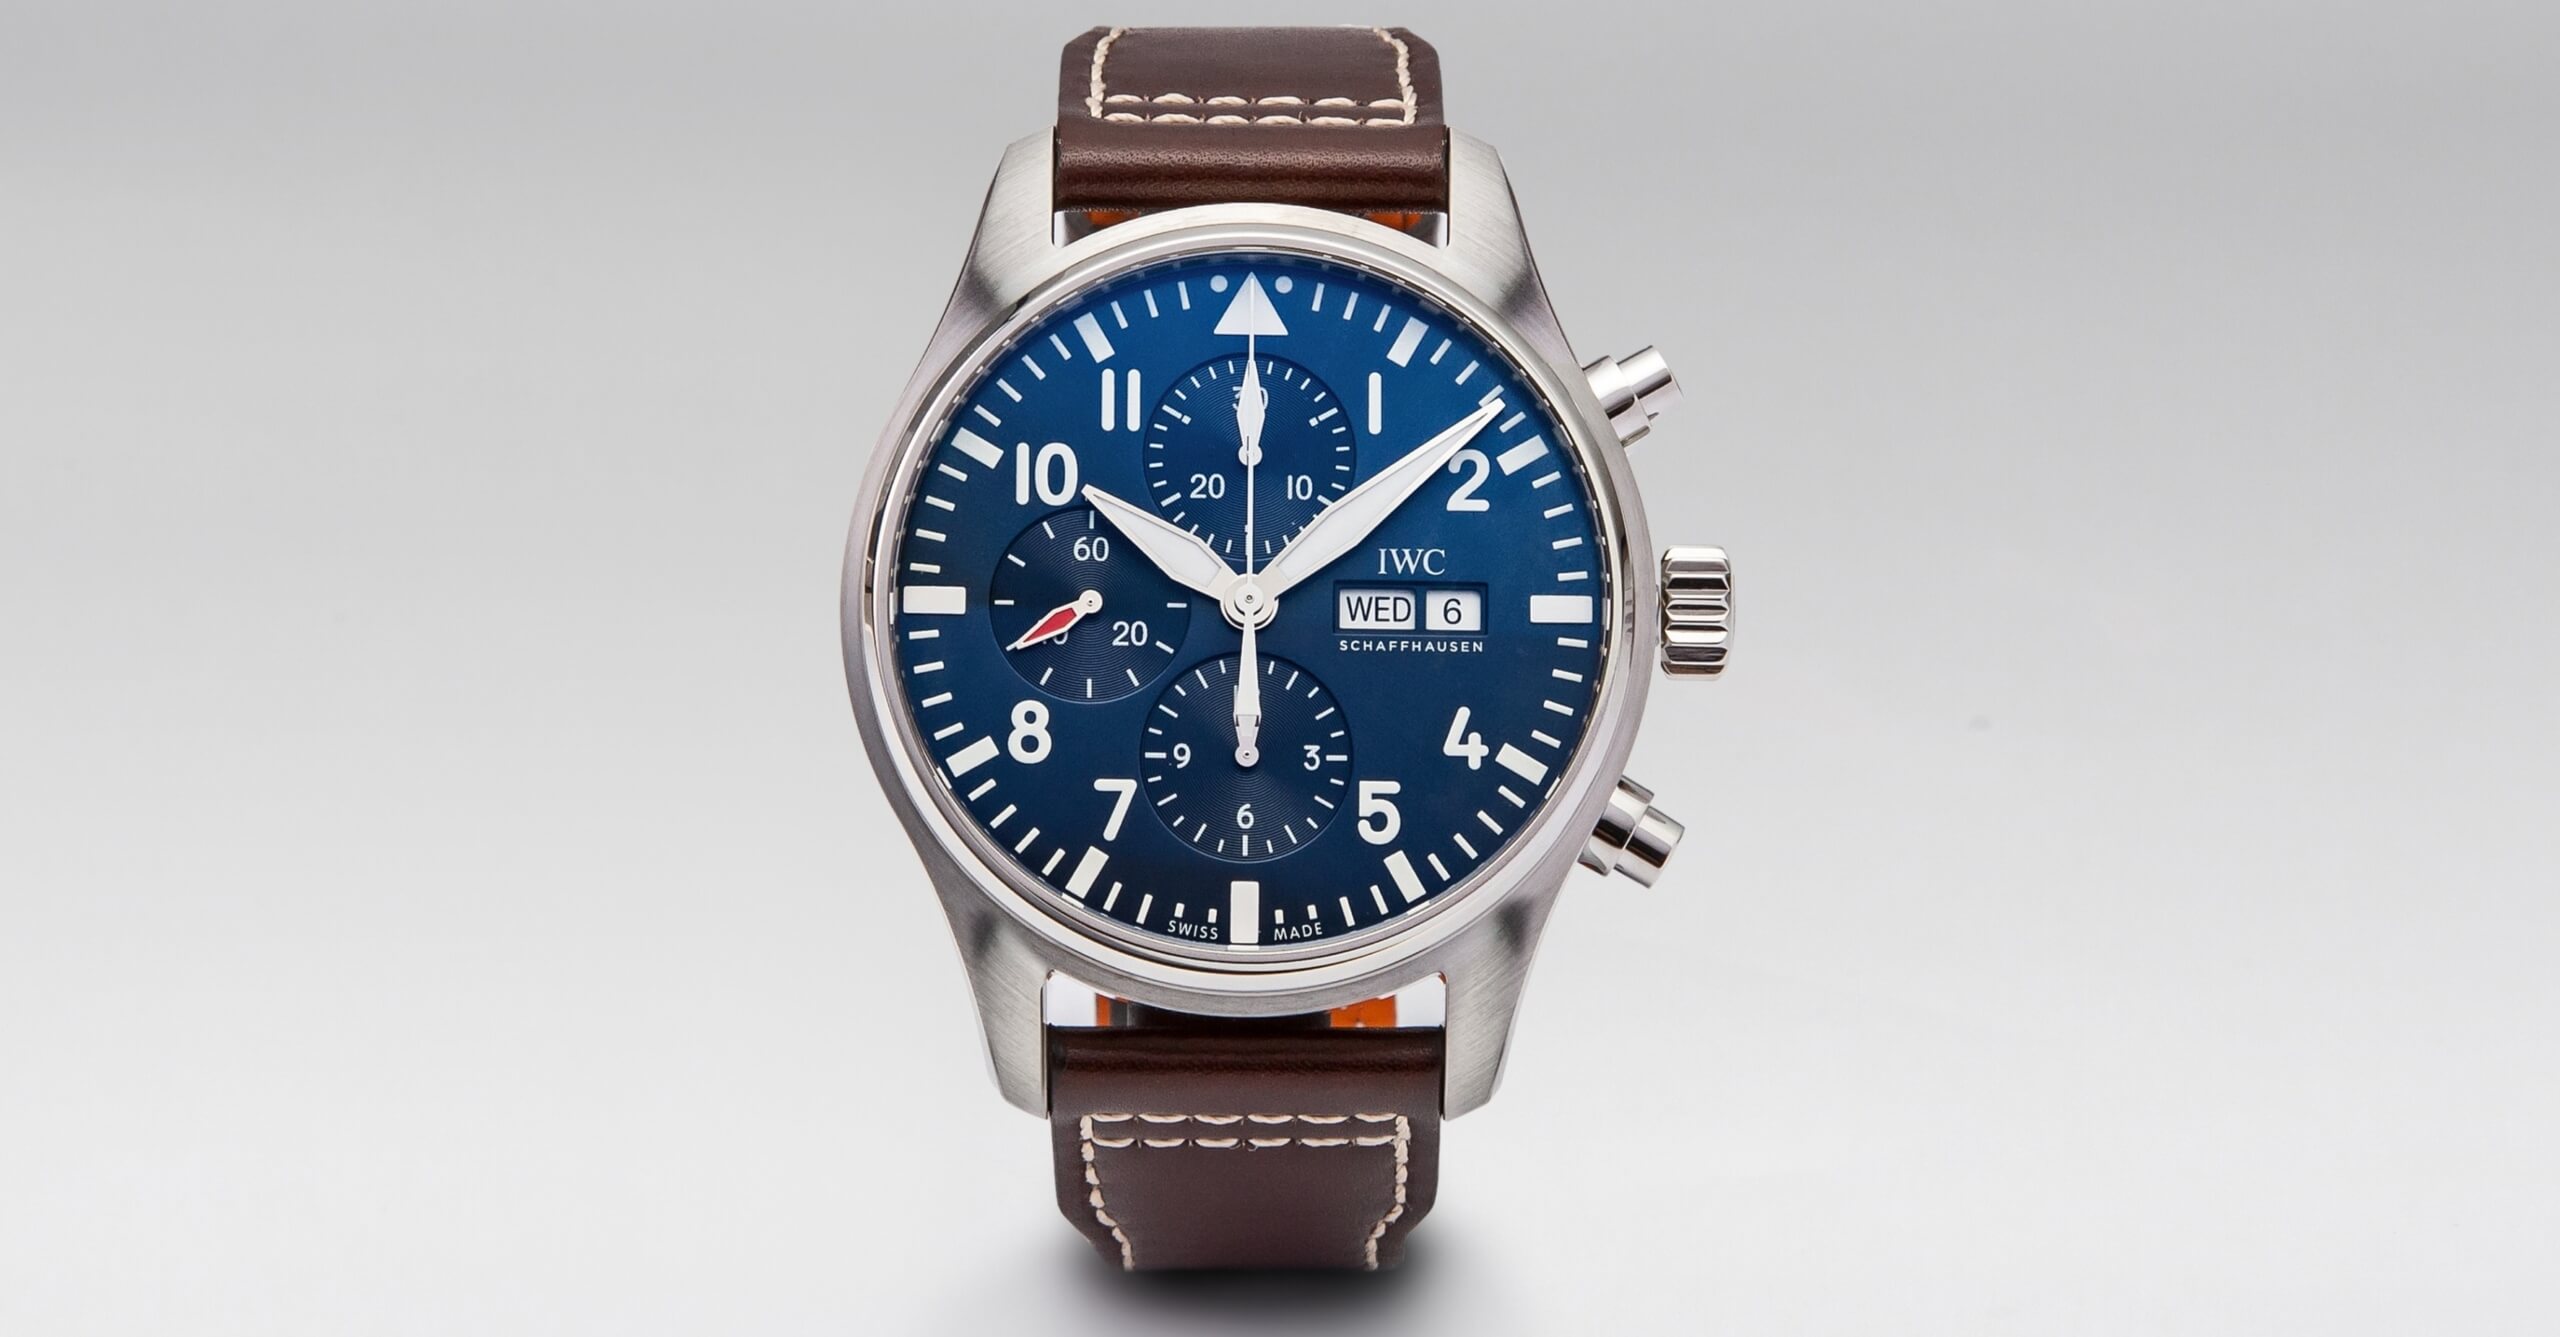 IWC Pilot's timepiece, with a blue dial and day/date complication.